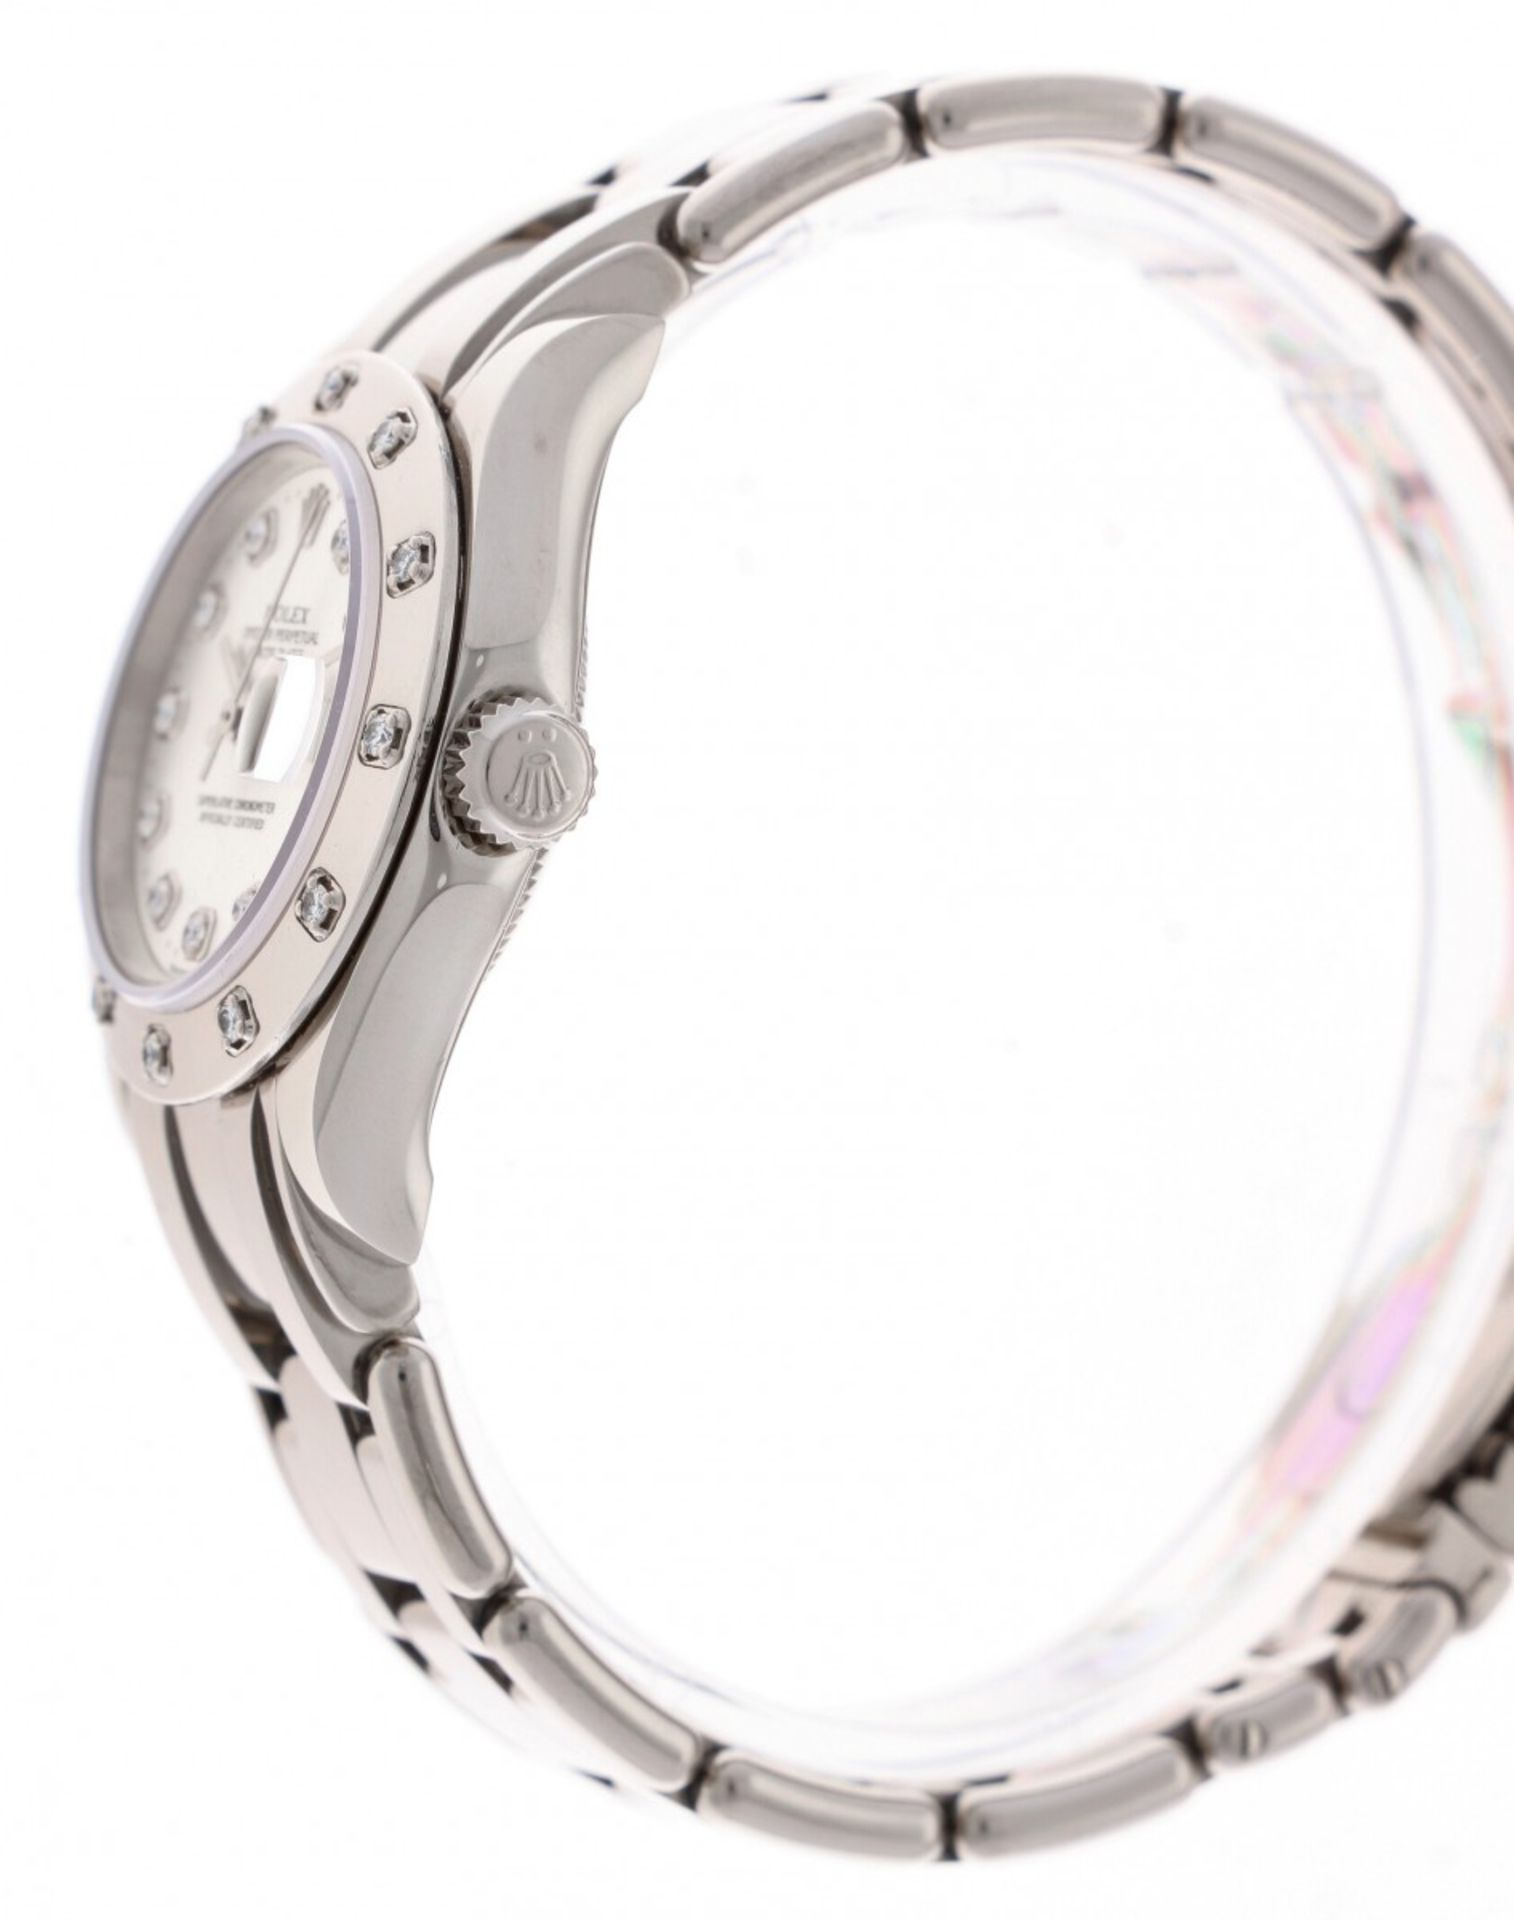 Rolex Pearlmaster 80319 - Ladies watch - ca. 2000 - Image 5 of 6